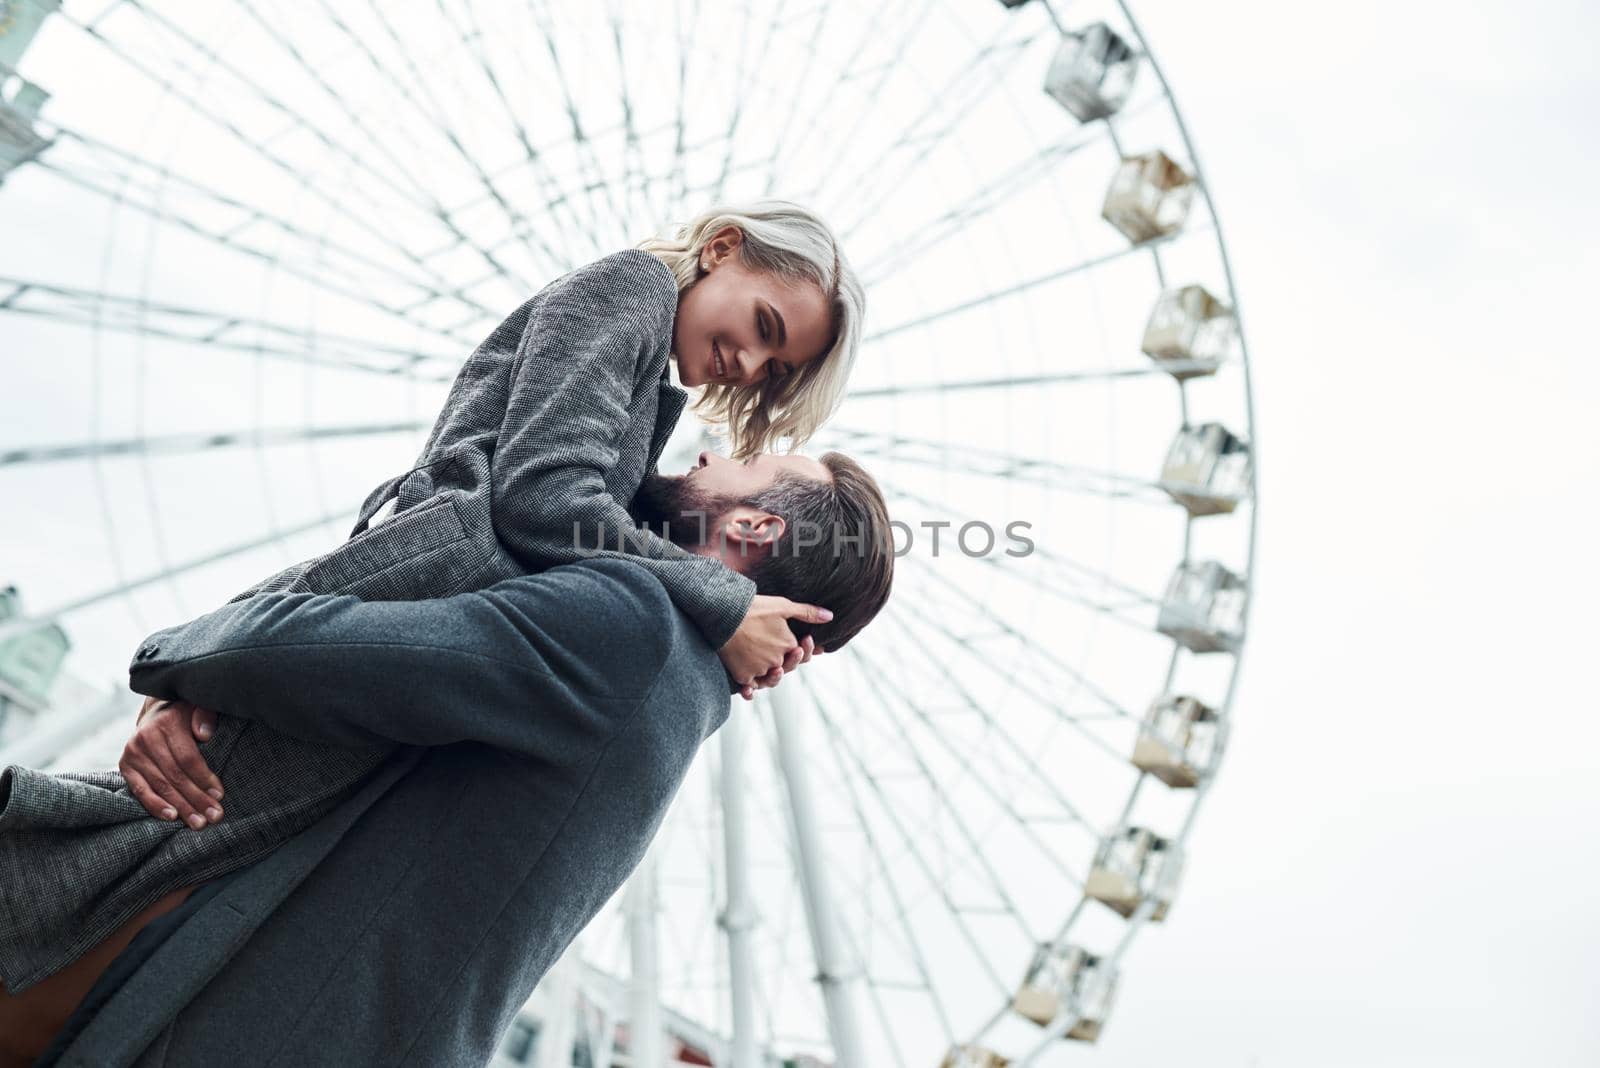 Romantic date outdoors. Young man holding woman up near the ferris wheel looking at each other smiling cheerful